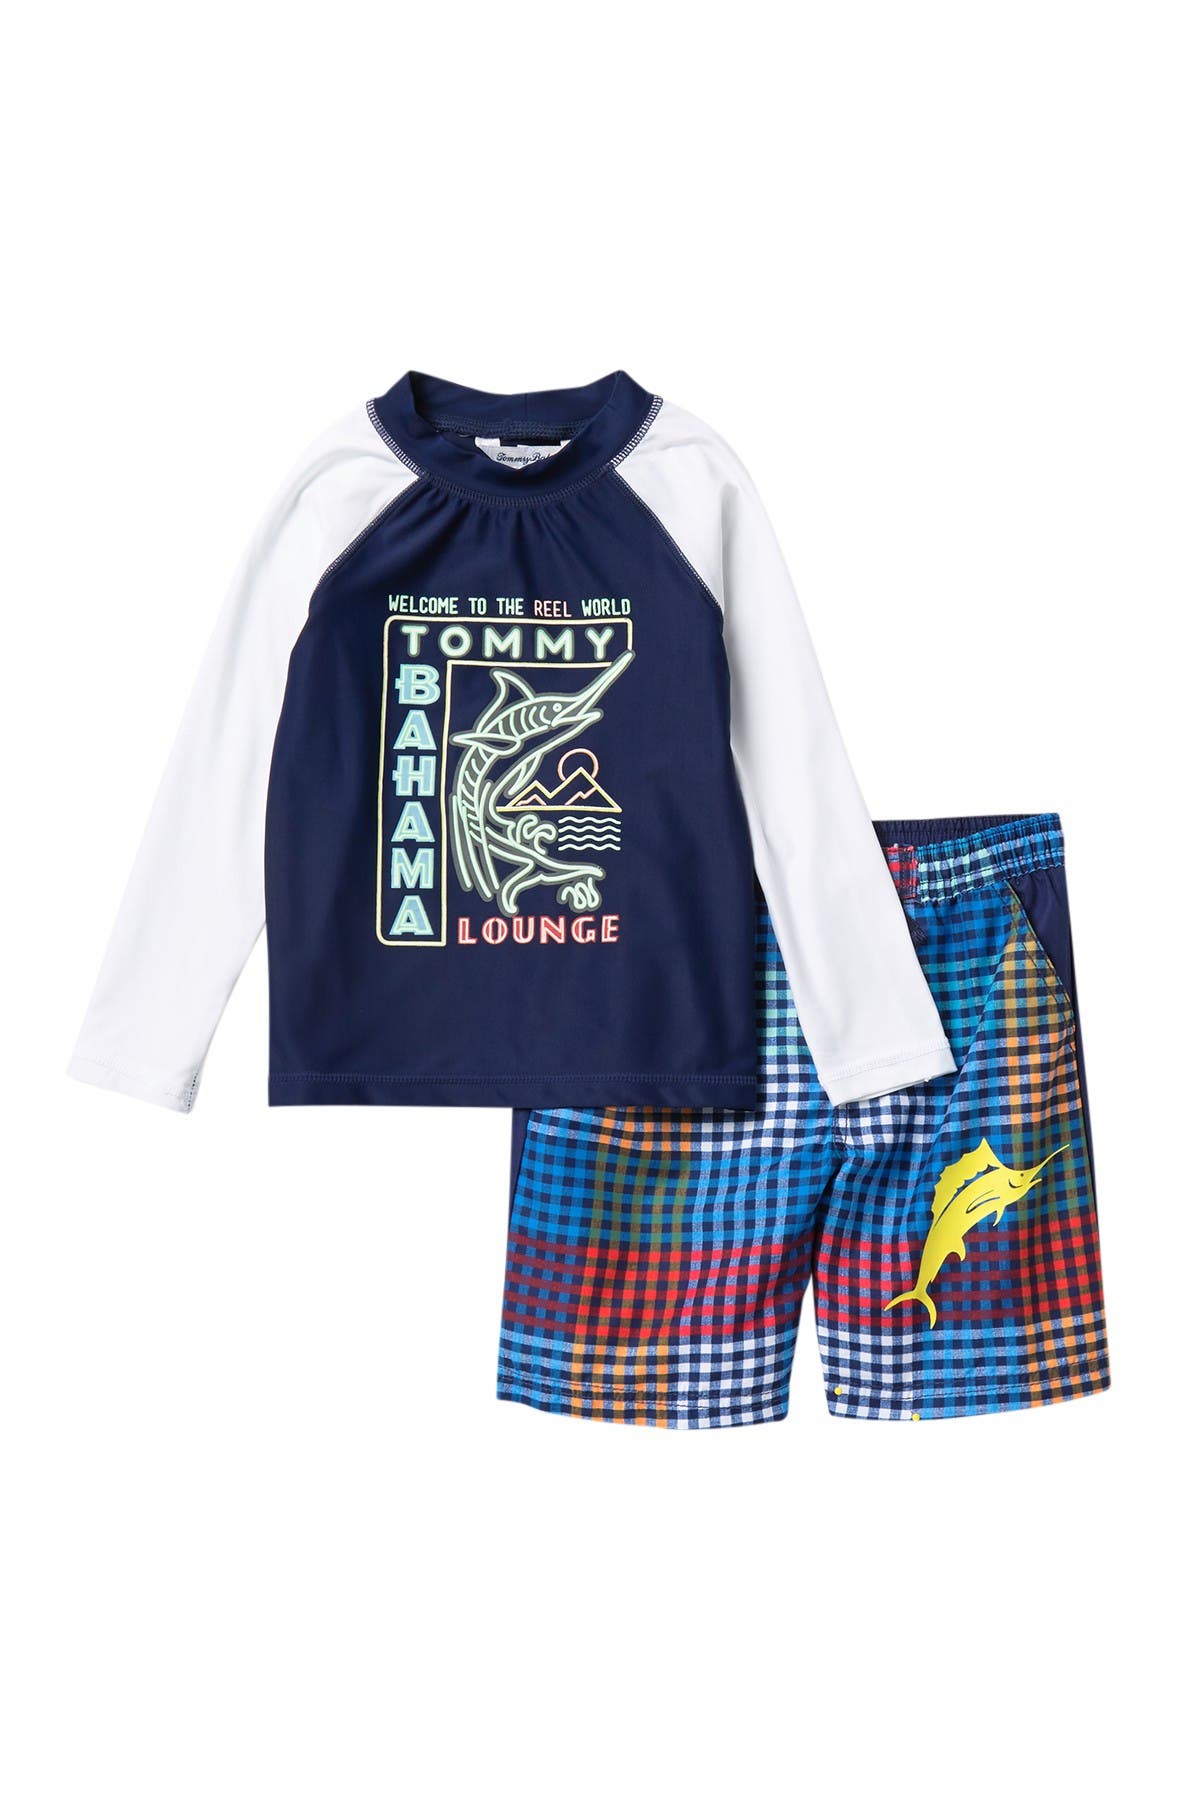 tommy bahama baby boy clothes